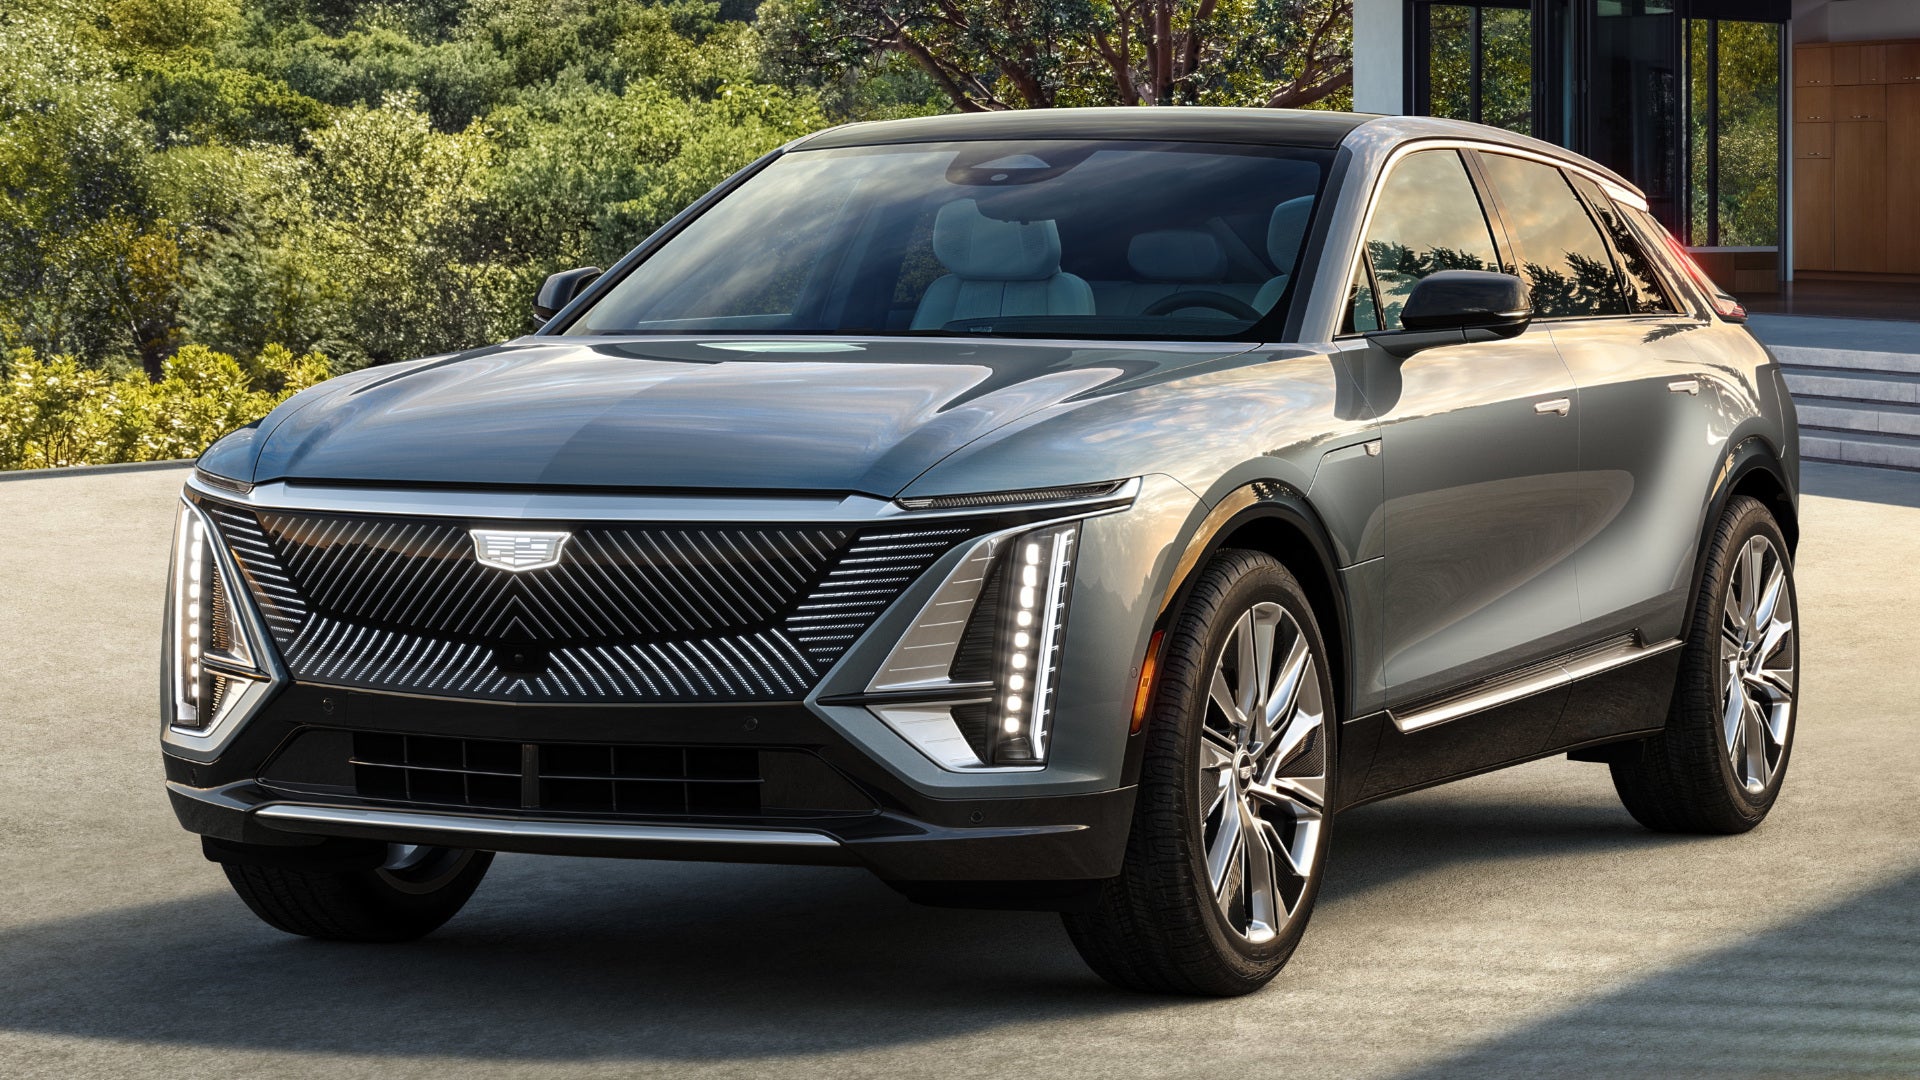 2023 Cadillac Lyriq Will Have 500 HP From Dual Motor AWD